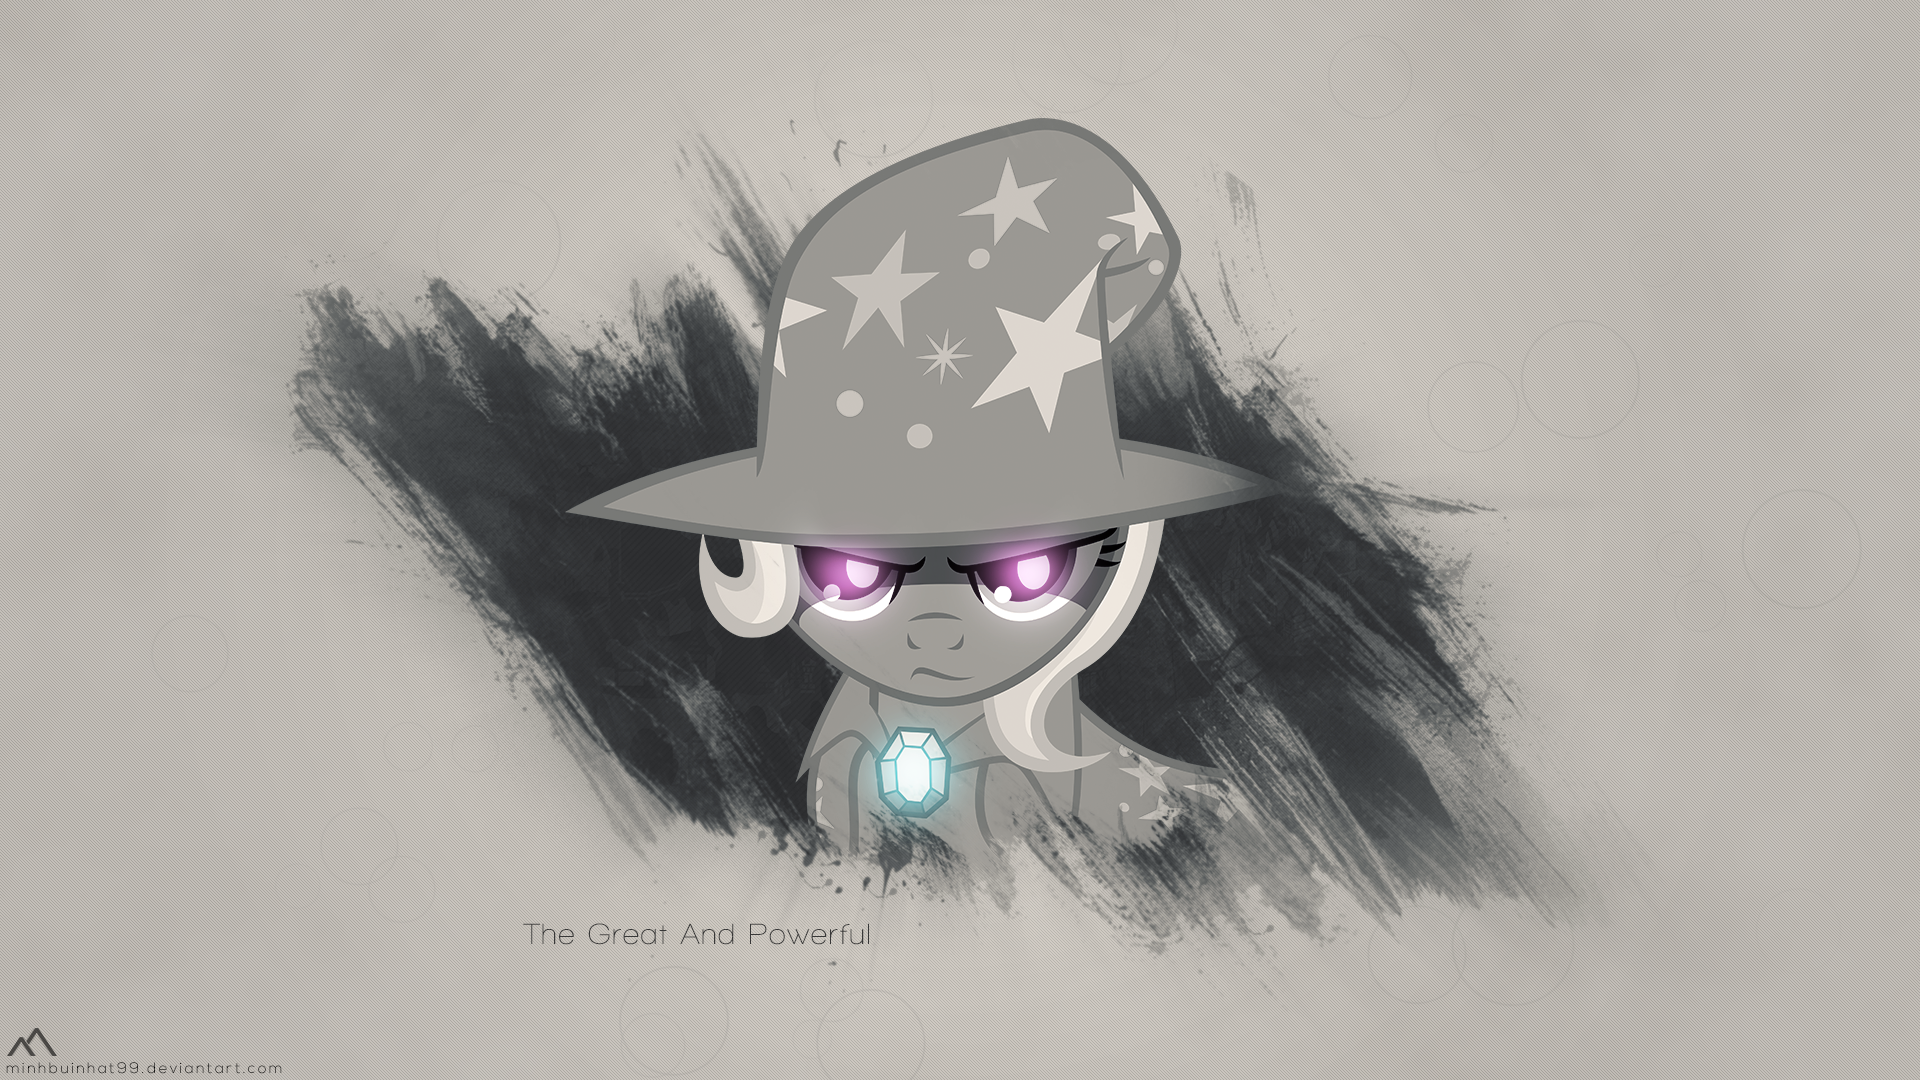 The Great And Powerful